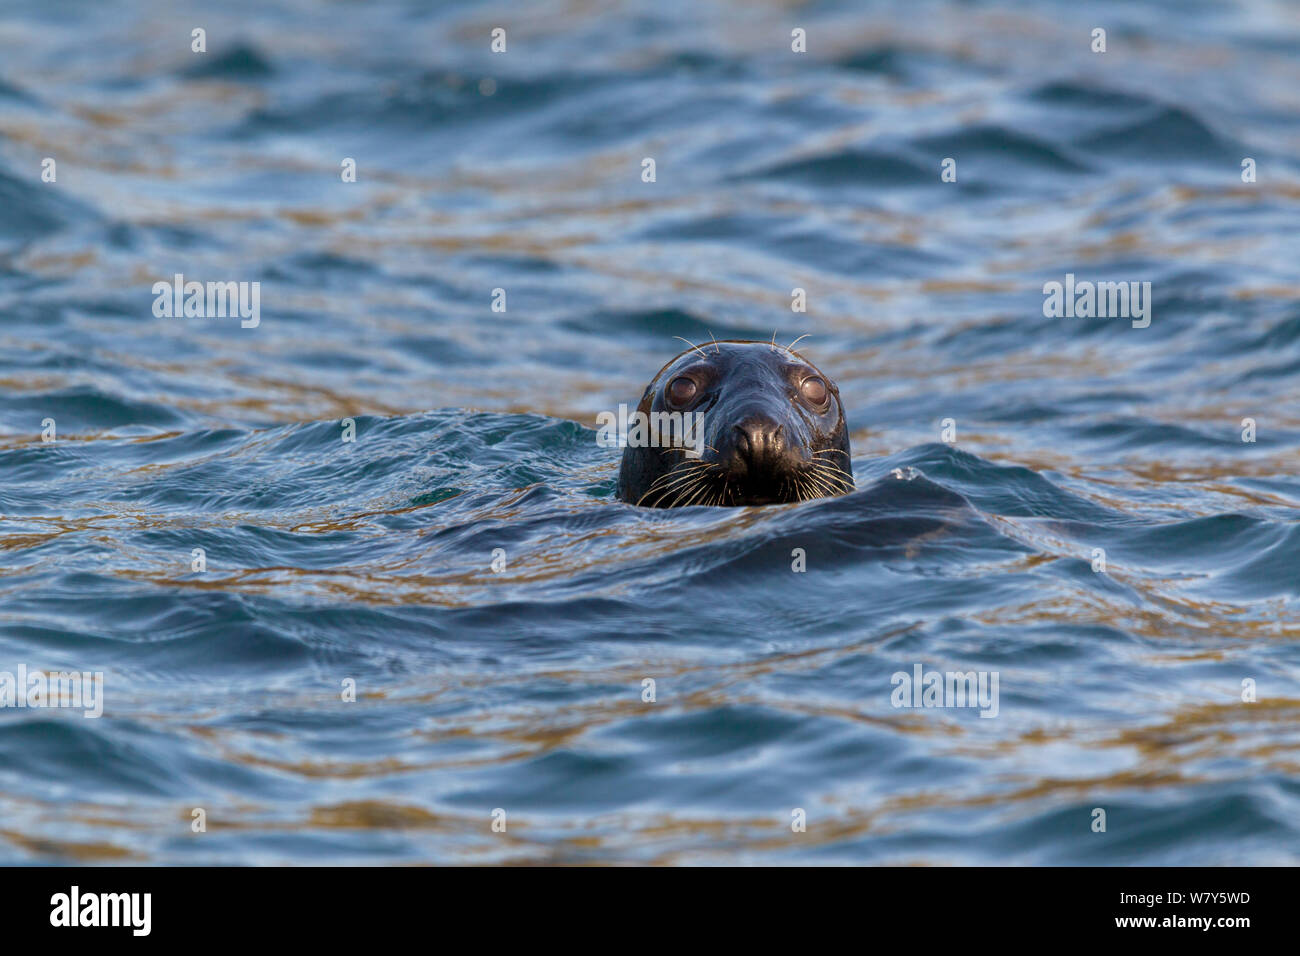 Grey seal (Halichoerus grypus) swimming in the sea with just head visible. Mingulay, Outer Hebrides, Scotland. June. Stock Photo